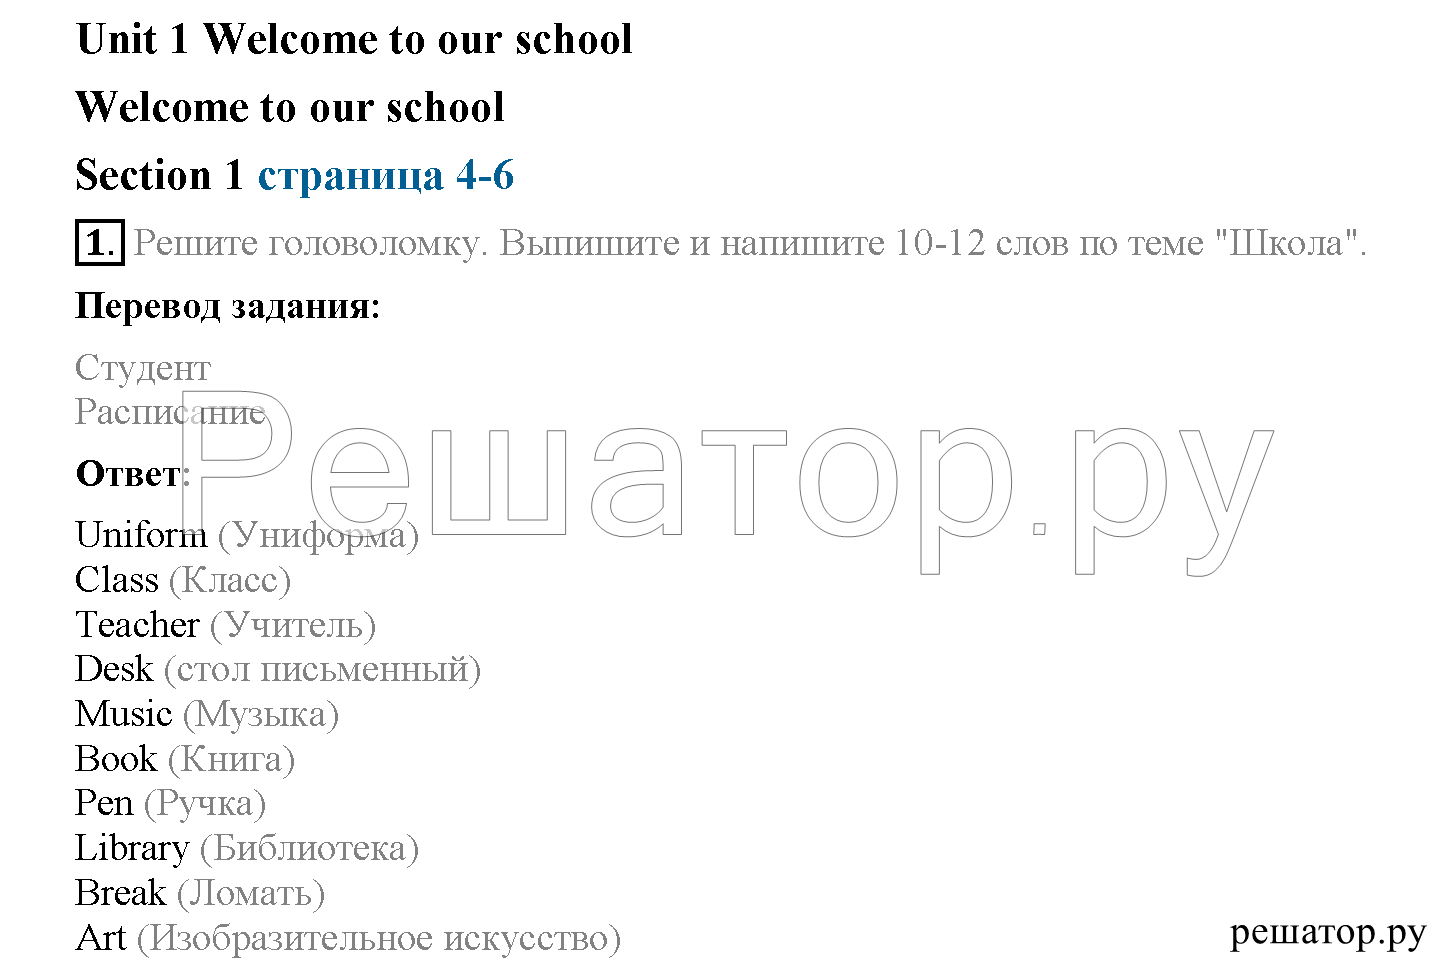 Unit 1. Welcome to our school. Section 1. (Стр. 4-6): 1 - решение